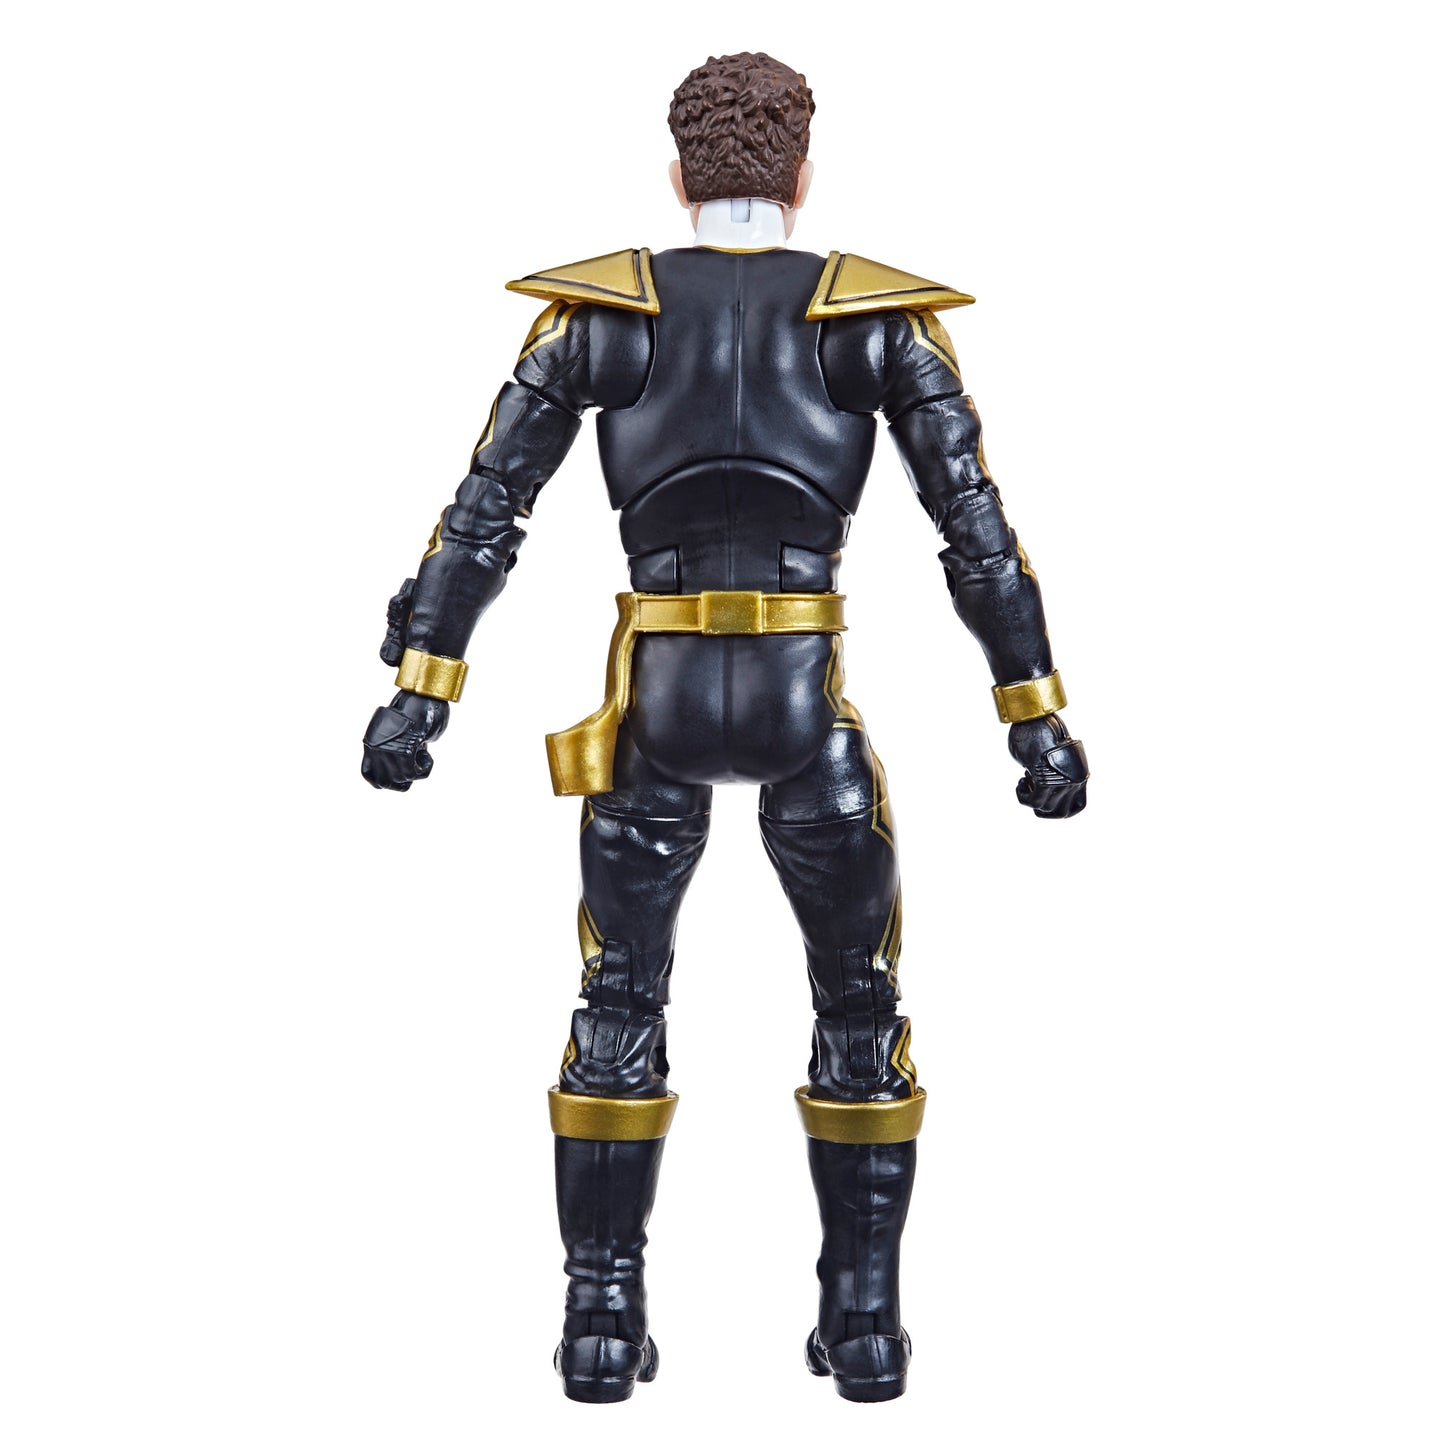 Power Rangers Lightning Collection Dino Thunder Black Ranger 6-Inch Premium Collectible Action Figure Toy with Accessories, Ages 4 and Up - Heretoserveyou